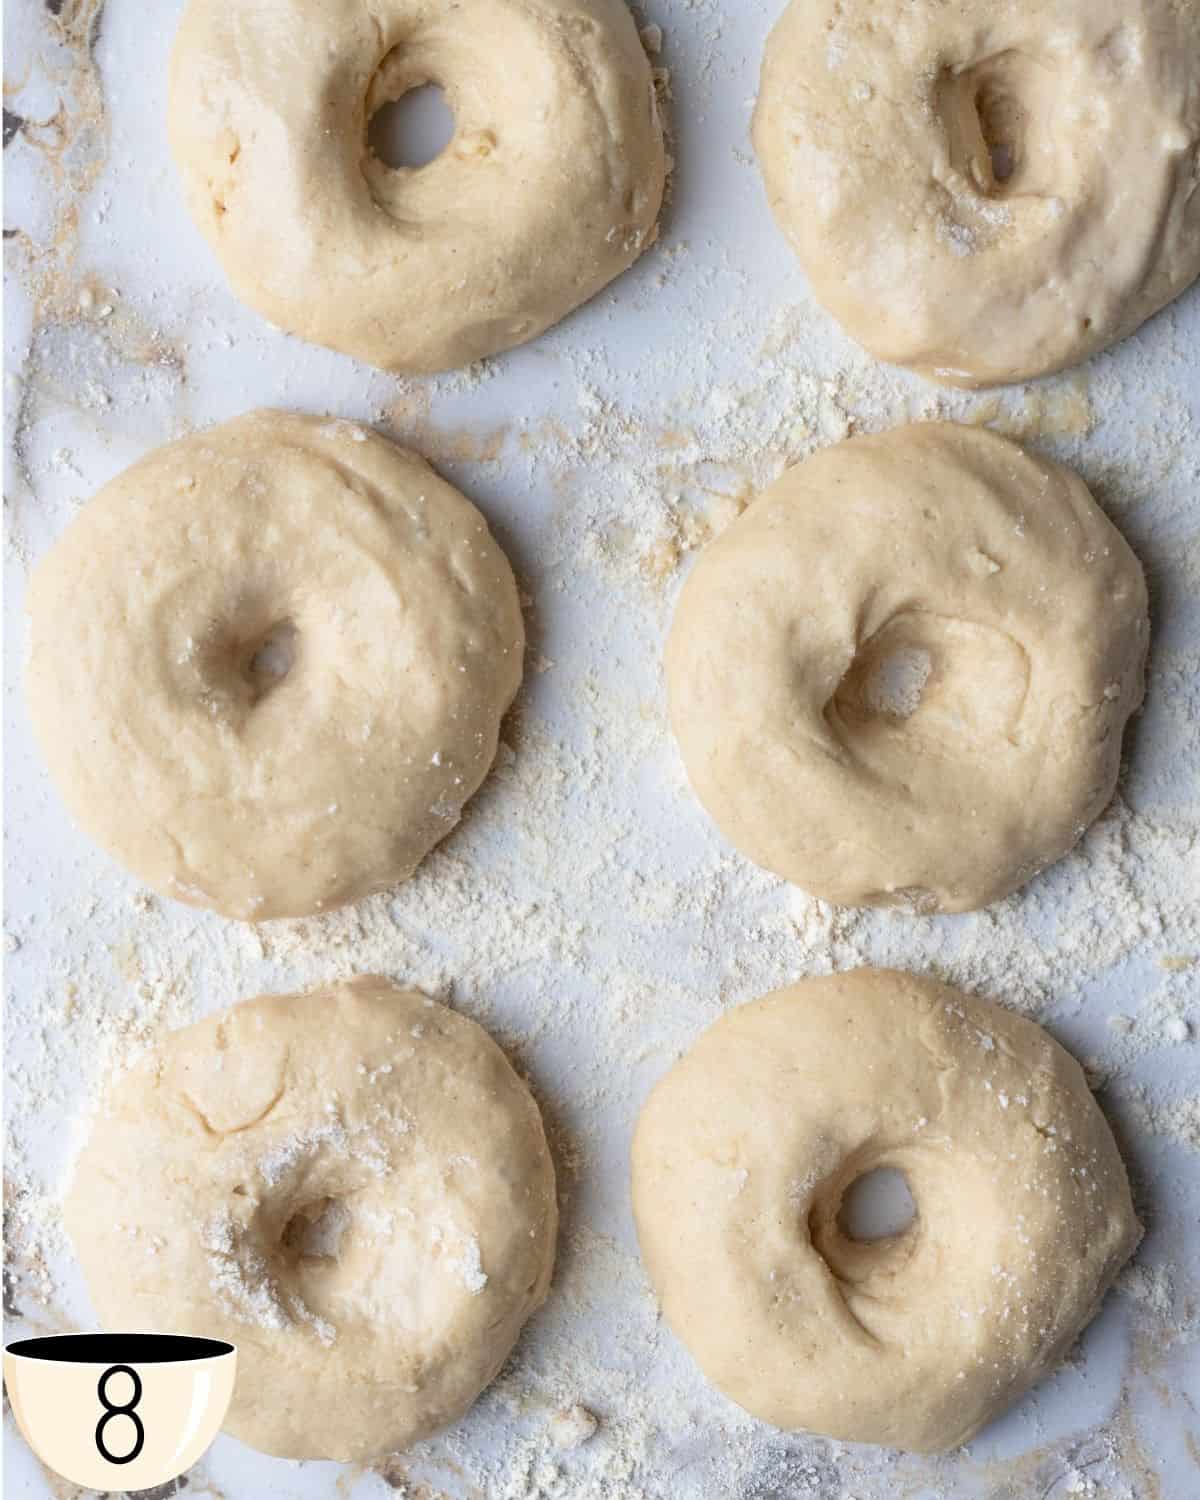 Six gluten-free bagel dough portions shaped into rings with center holes on a floured surface.